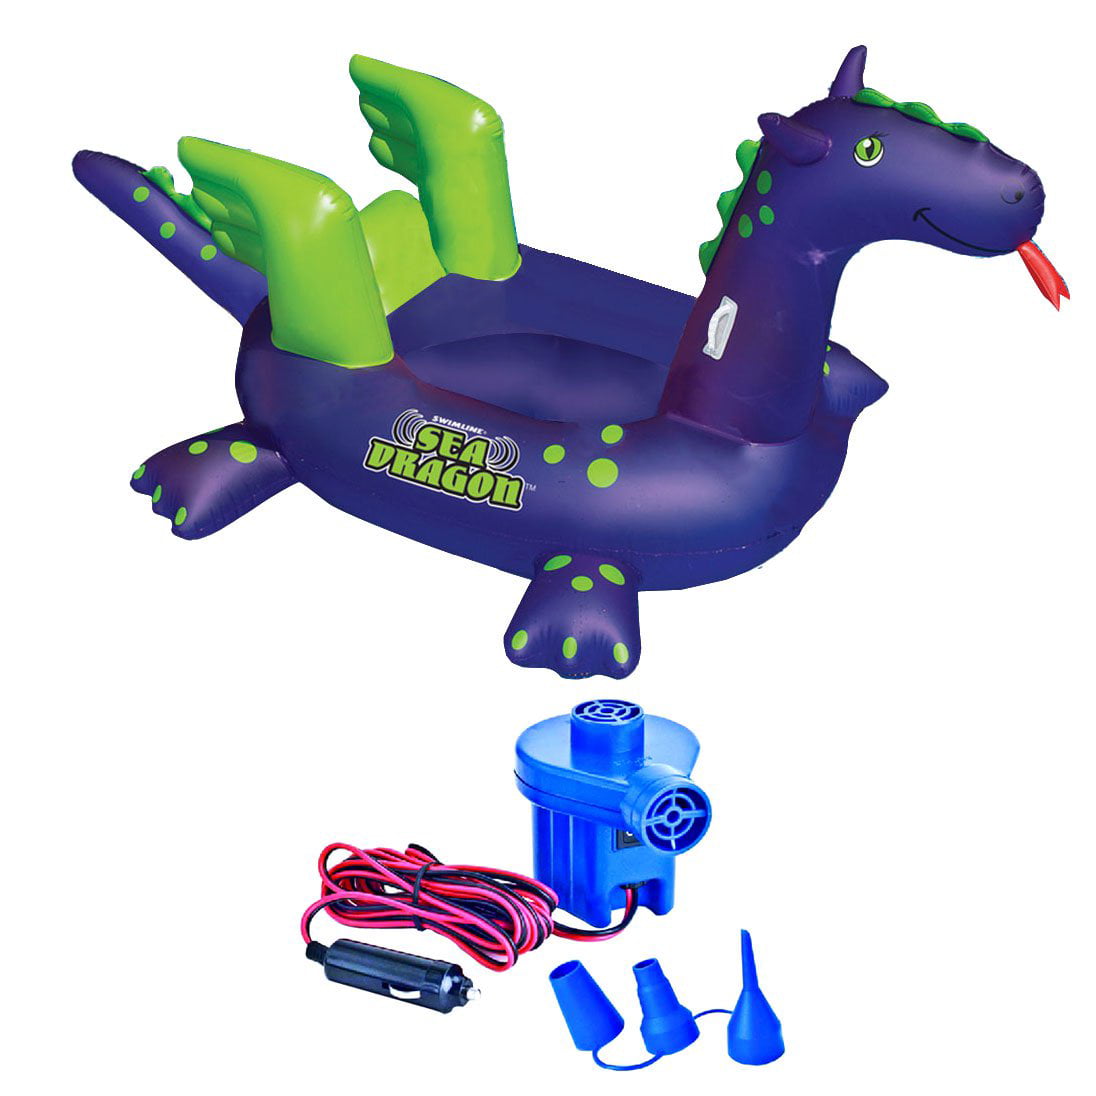 Swimline 90624 Swimming Pool Kids Giant Rideable Dinosaur Inflatable Float Toy 